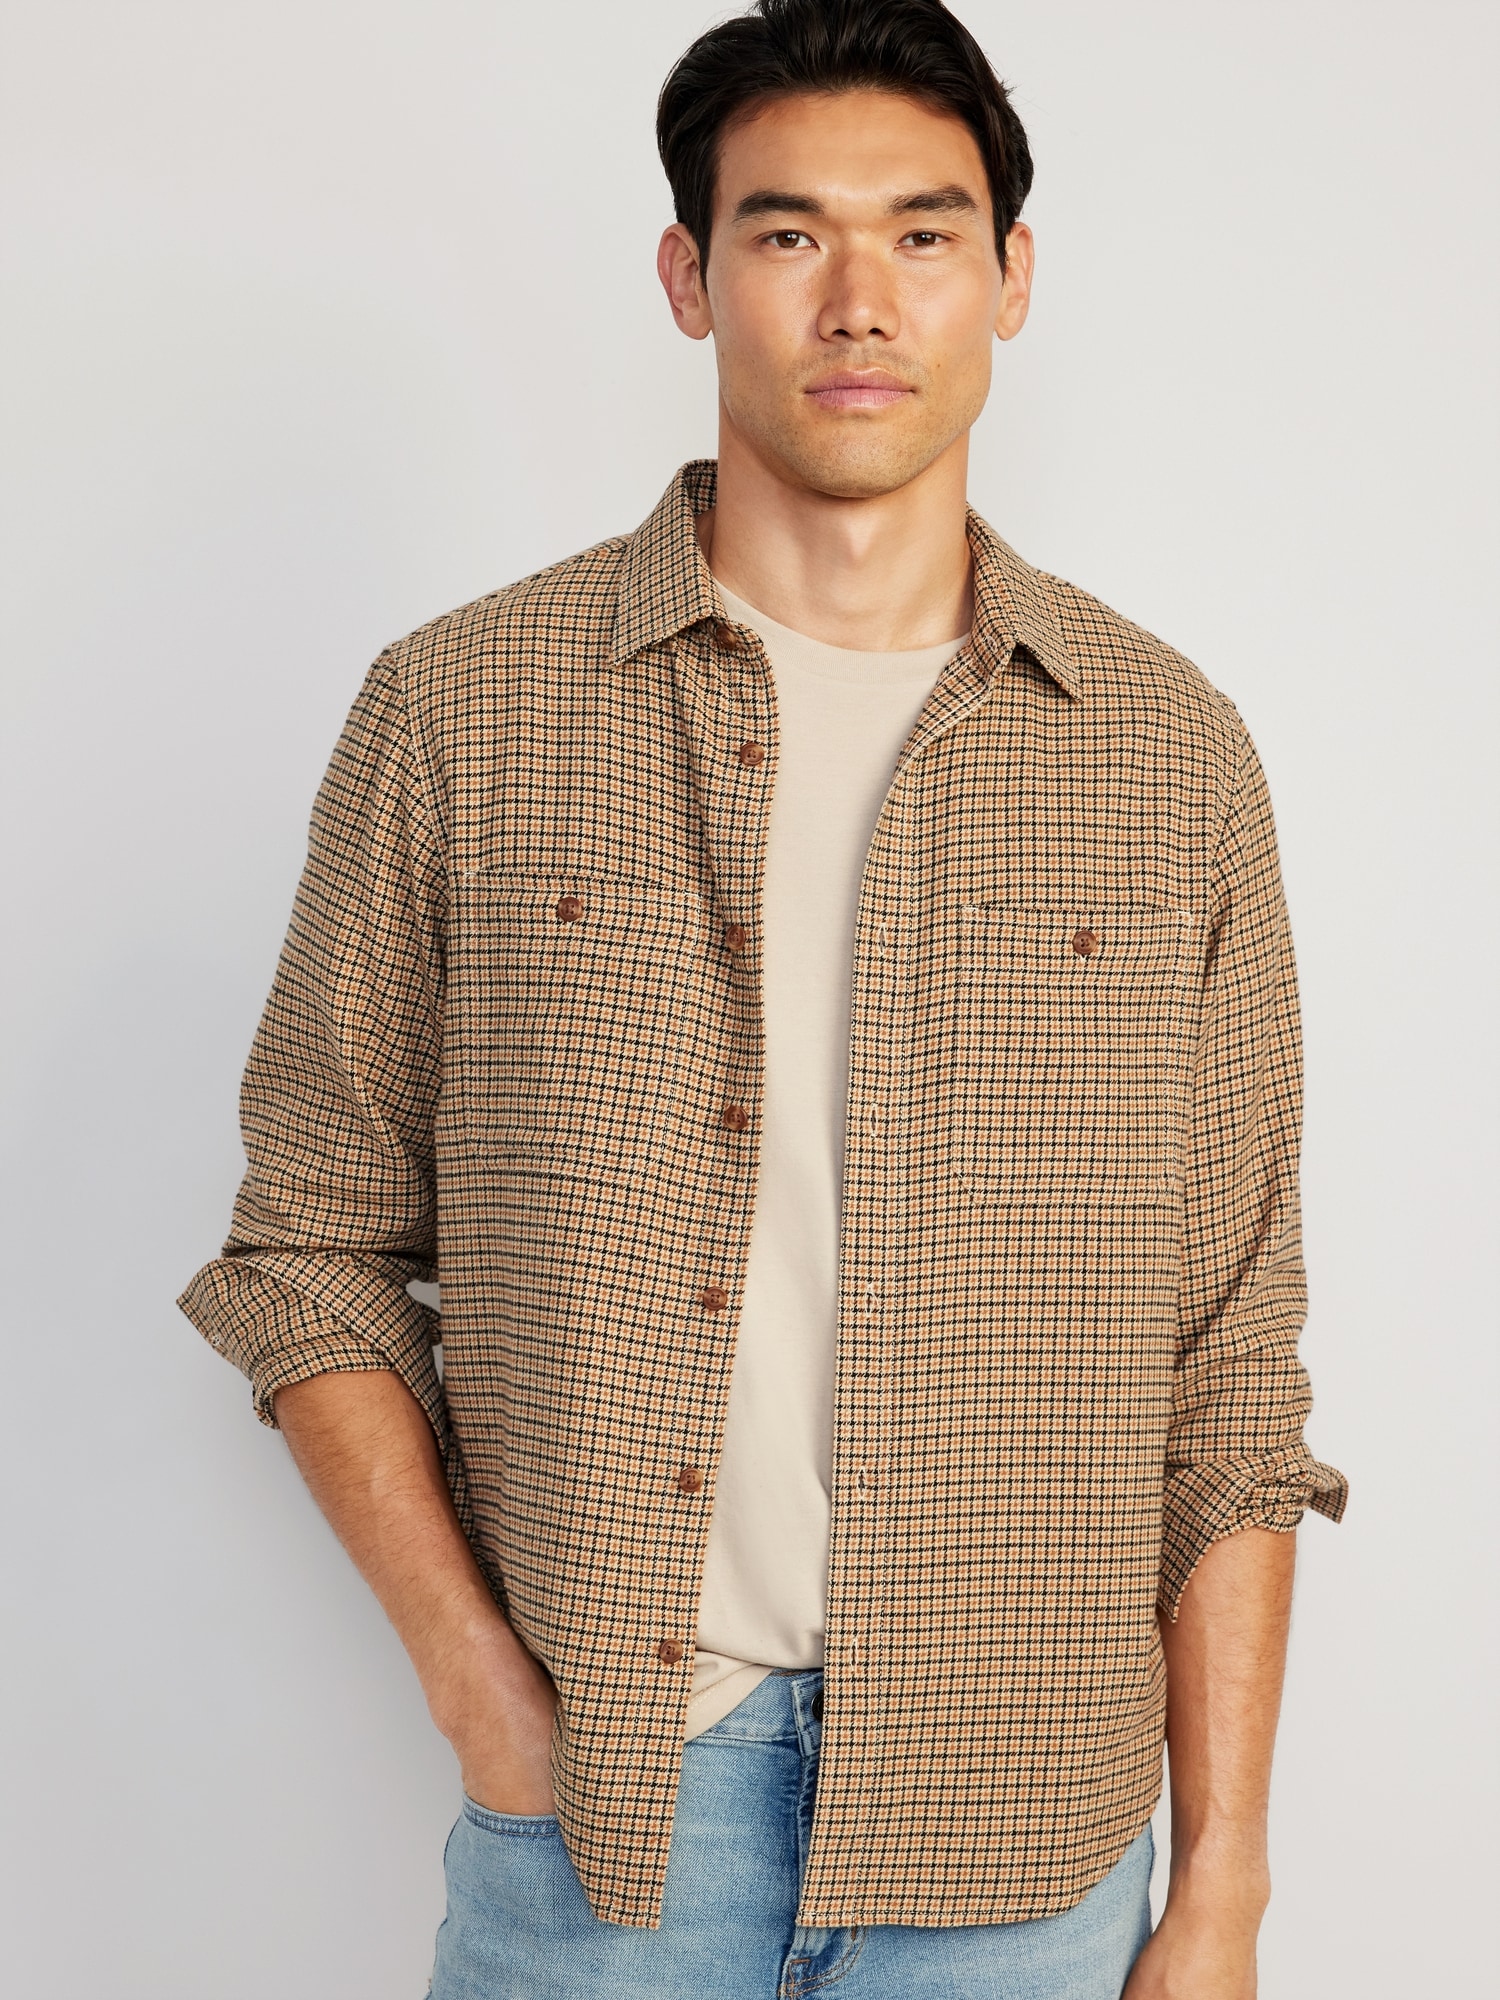 Men's Button Up Shirts: Plaid, Checkered & Flannel